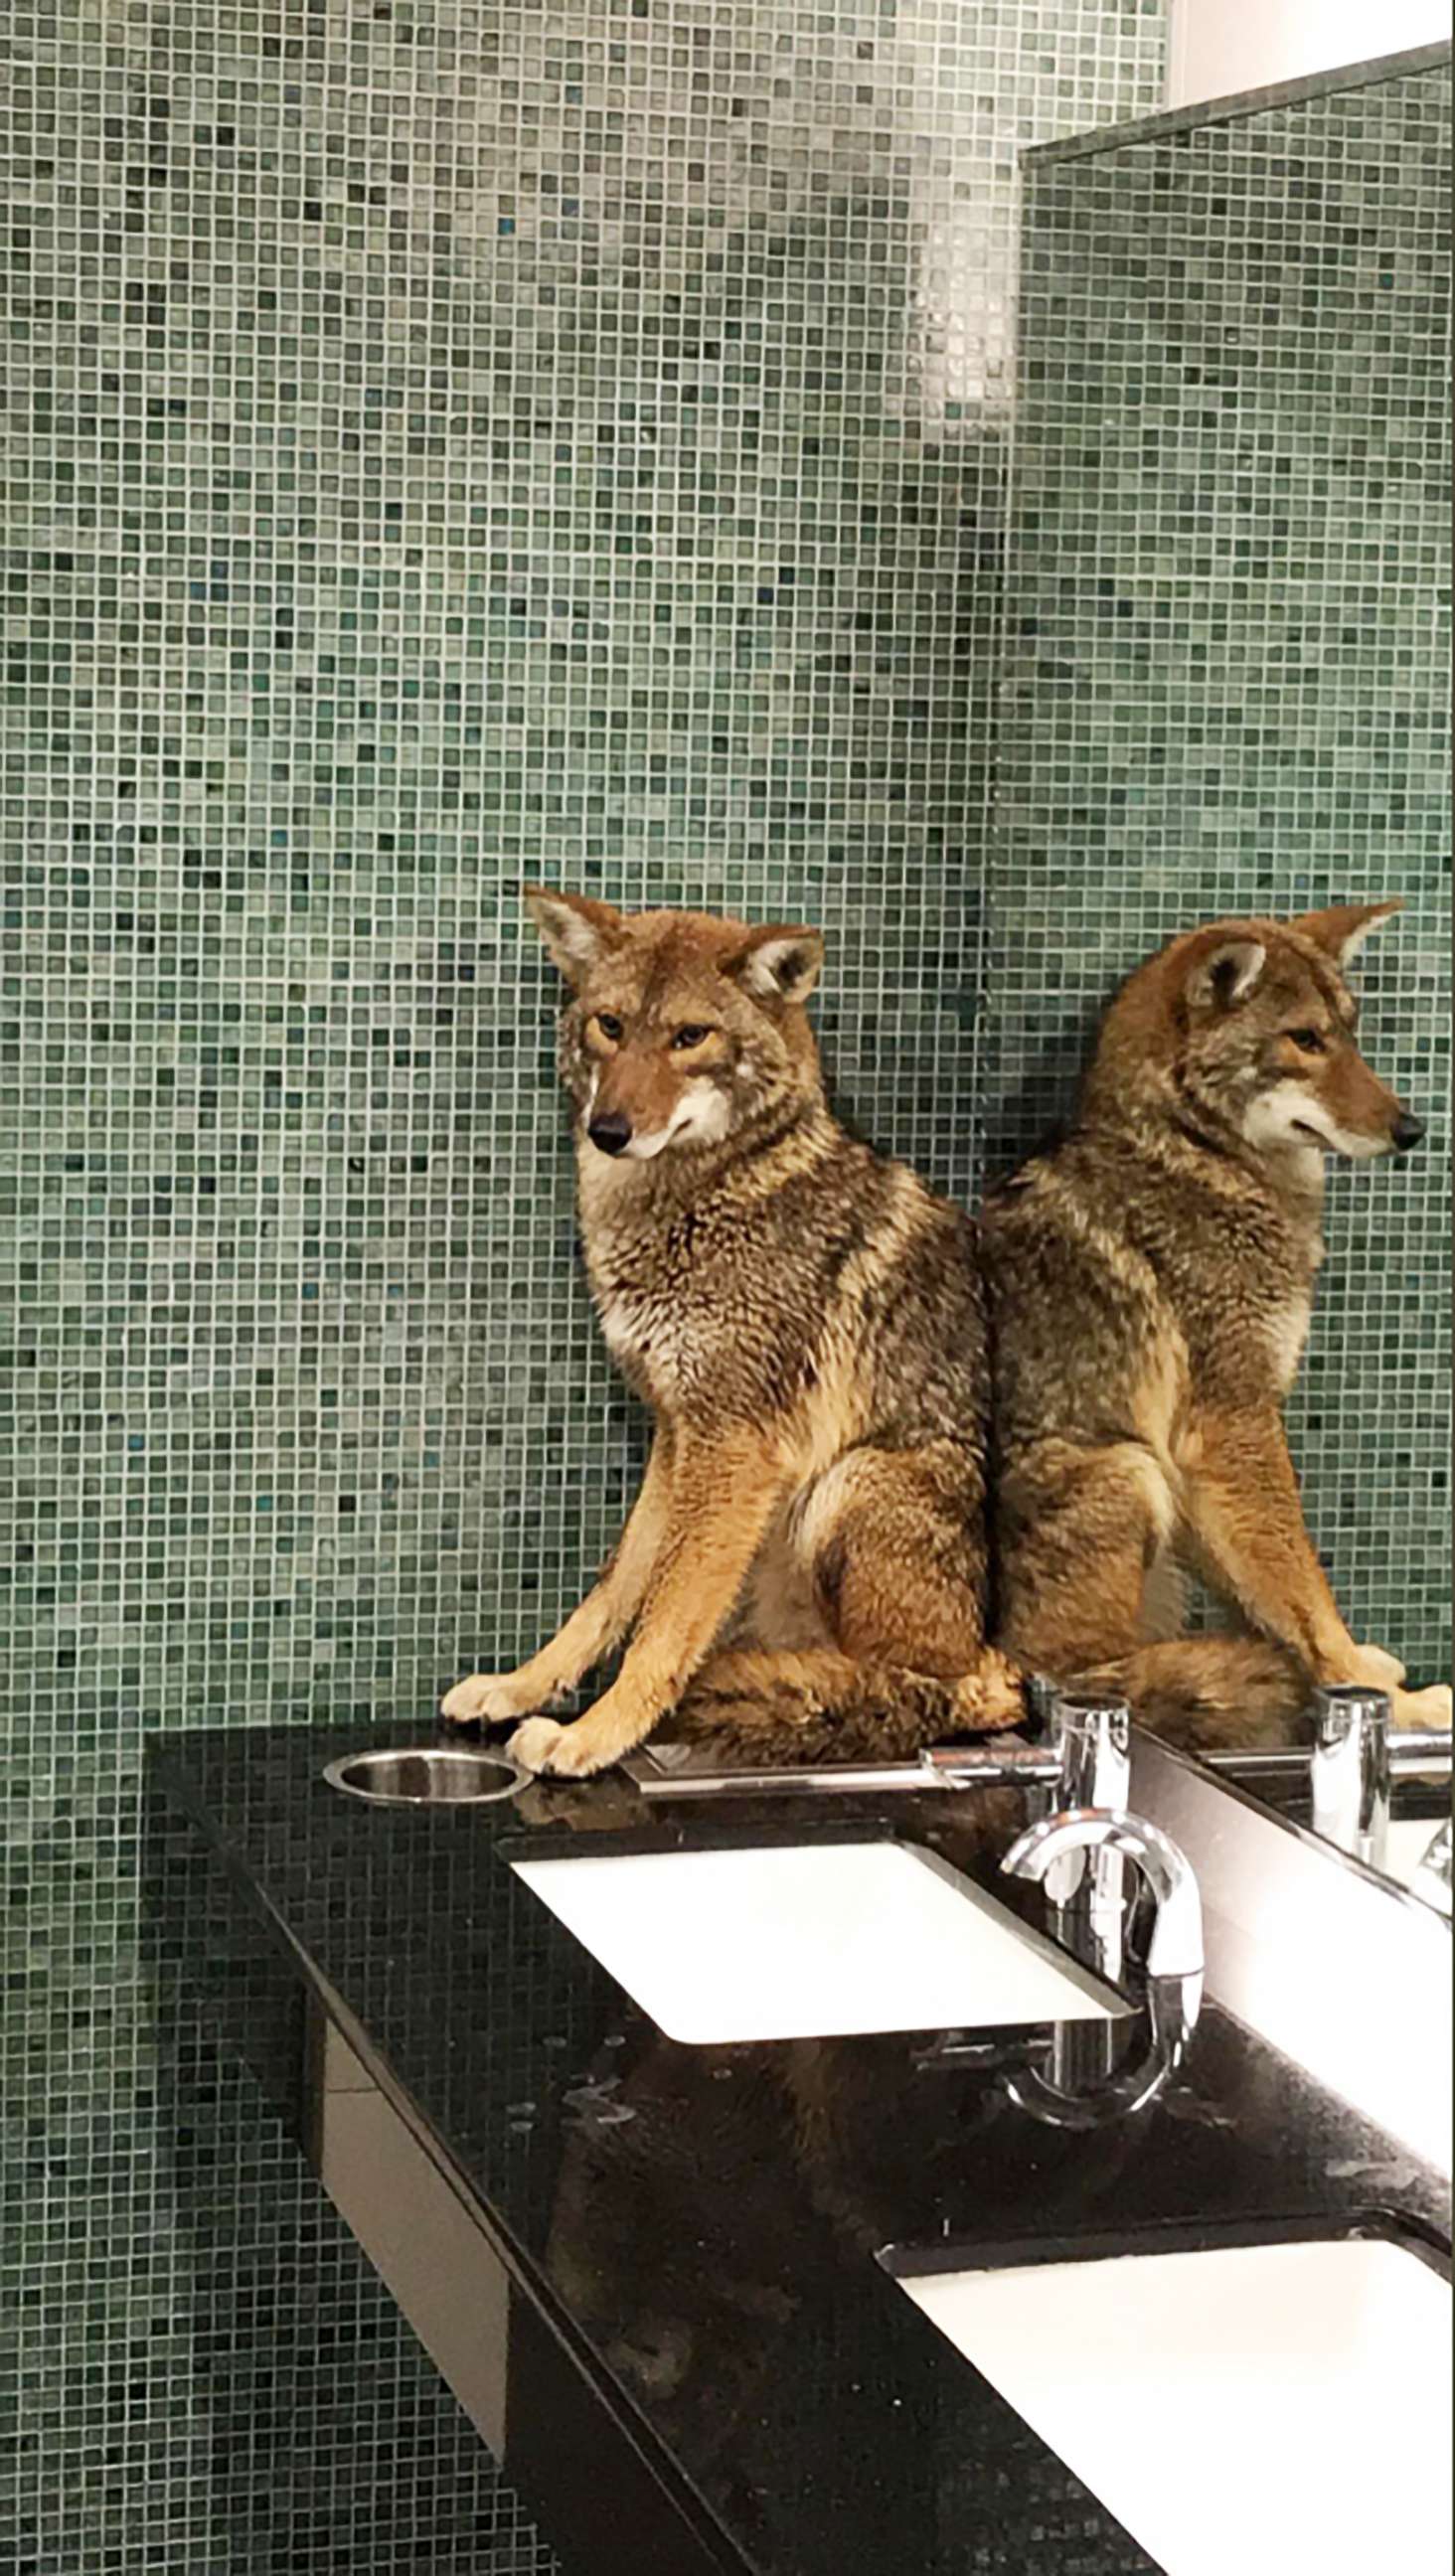 PHOTO: Employees of the Music City Center in Nashville were able to lock a coyote who ran past the security checkpoint in a men's bathroom on Jan. 13.
